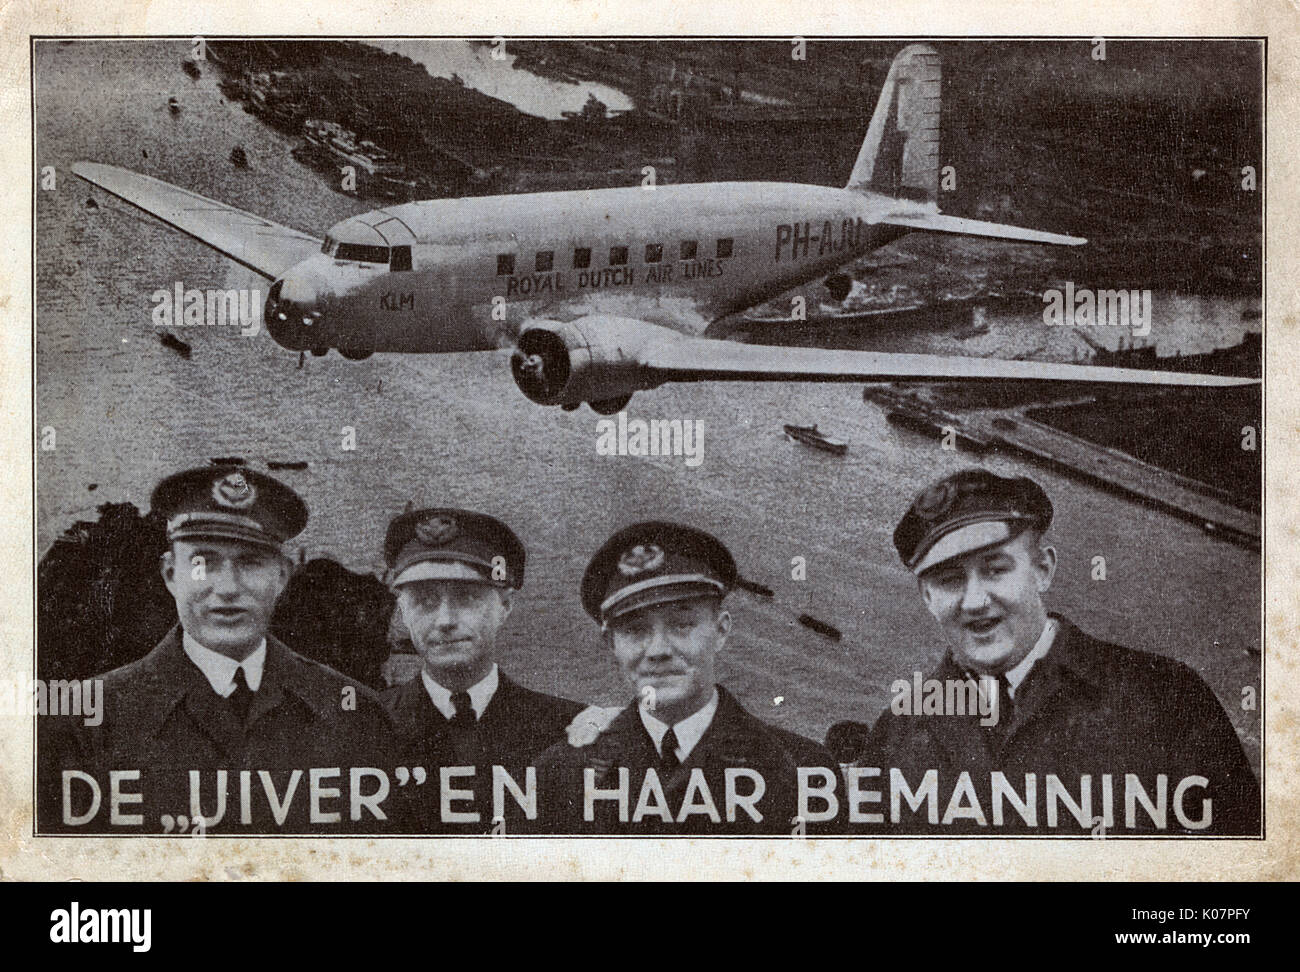 The crew of the Uiver, Royal Dutch Airlines (KLM) Stock Photo